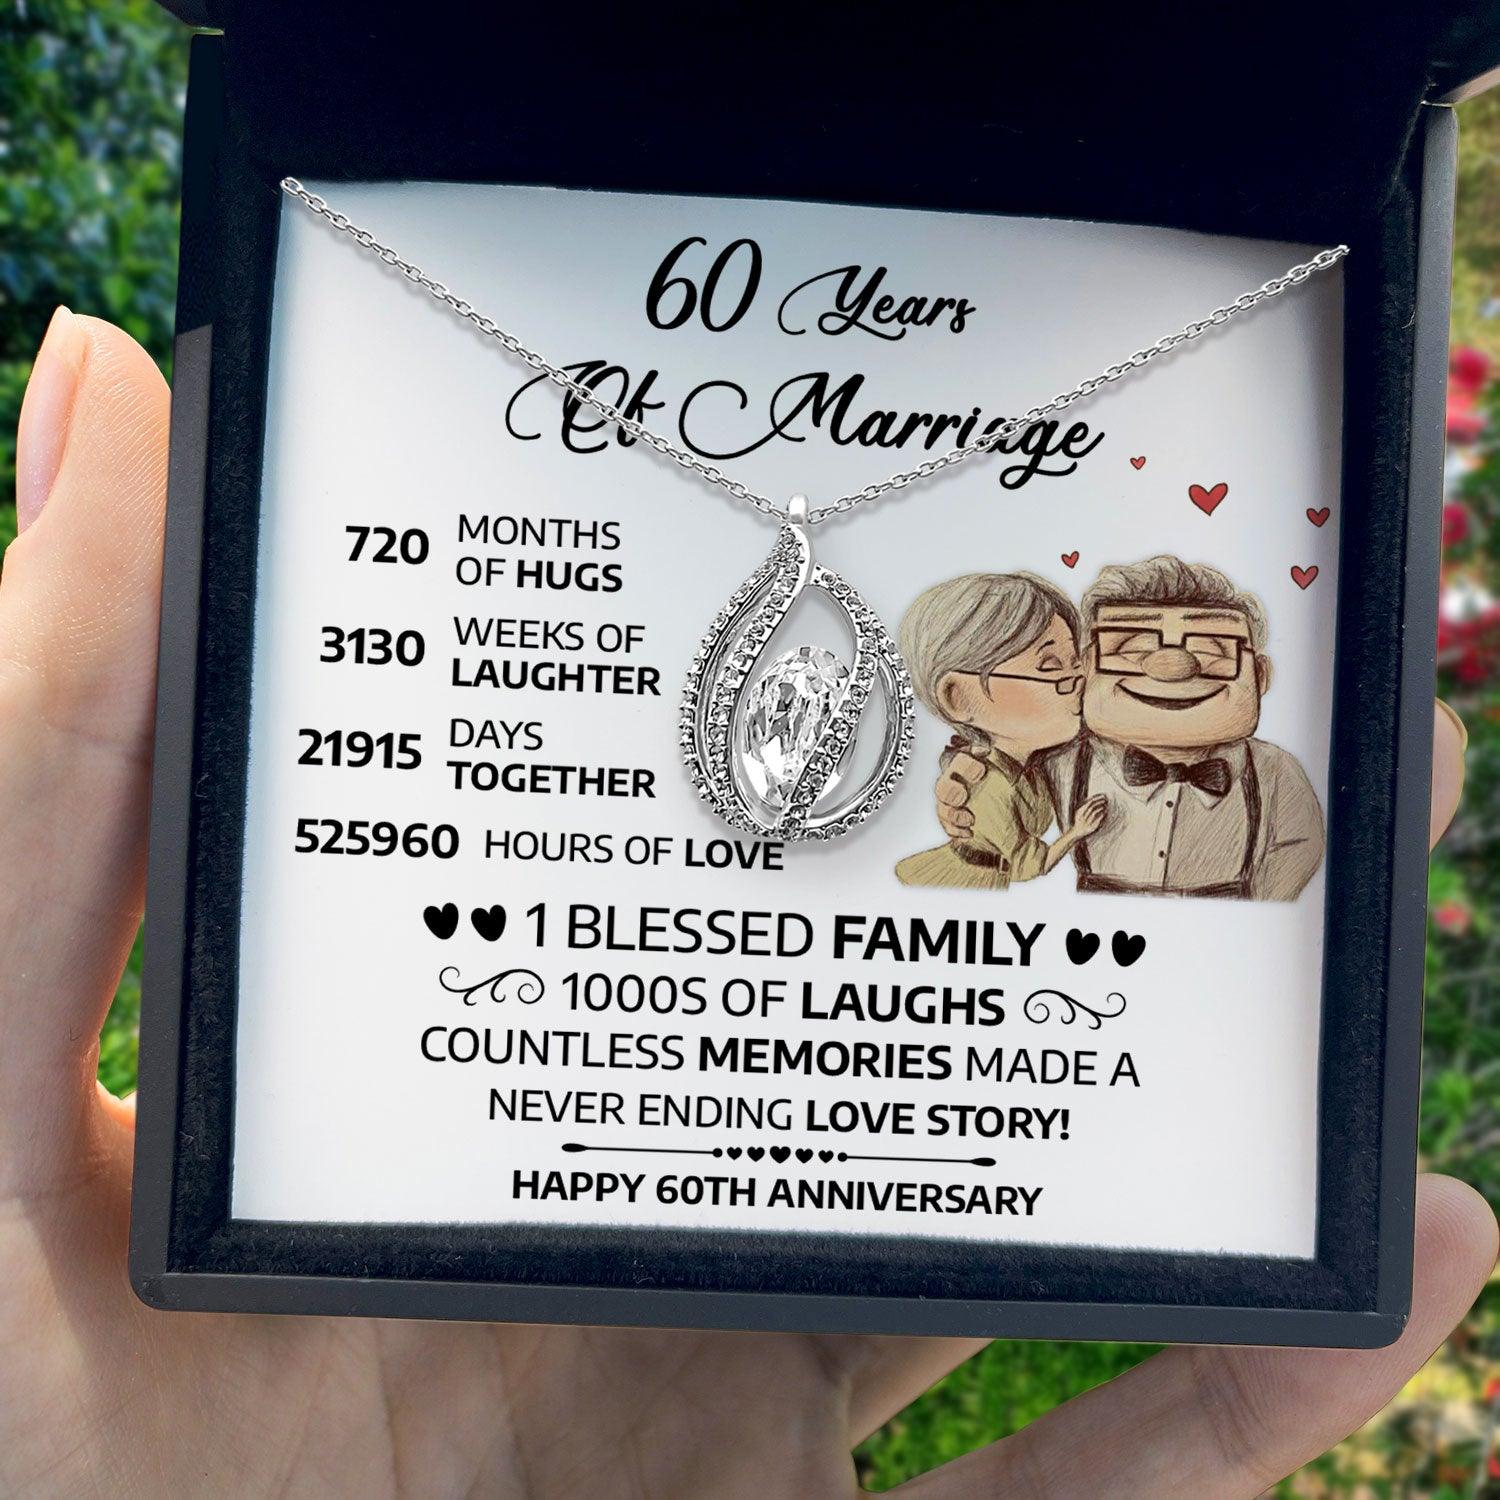 Anniversary Gifts for Her - 1 Blessed Family 1000s Of Laughs, Countless Memories Made a Never Ending Love Story  - Orbital Birdcage Necklace - TRYNDI